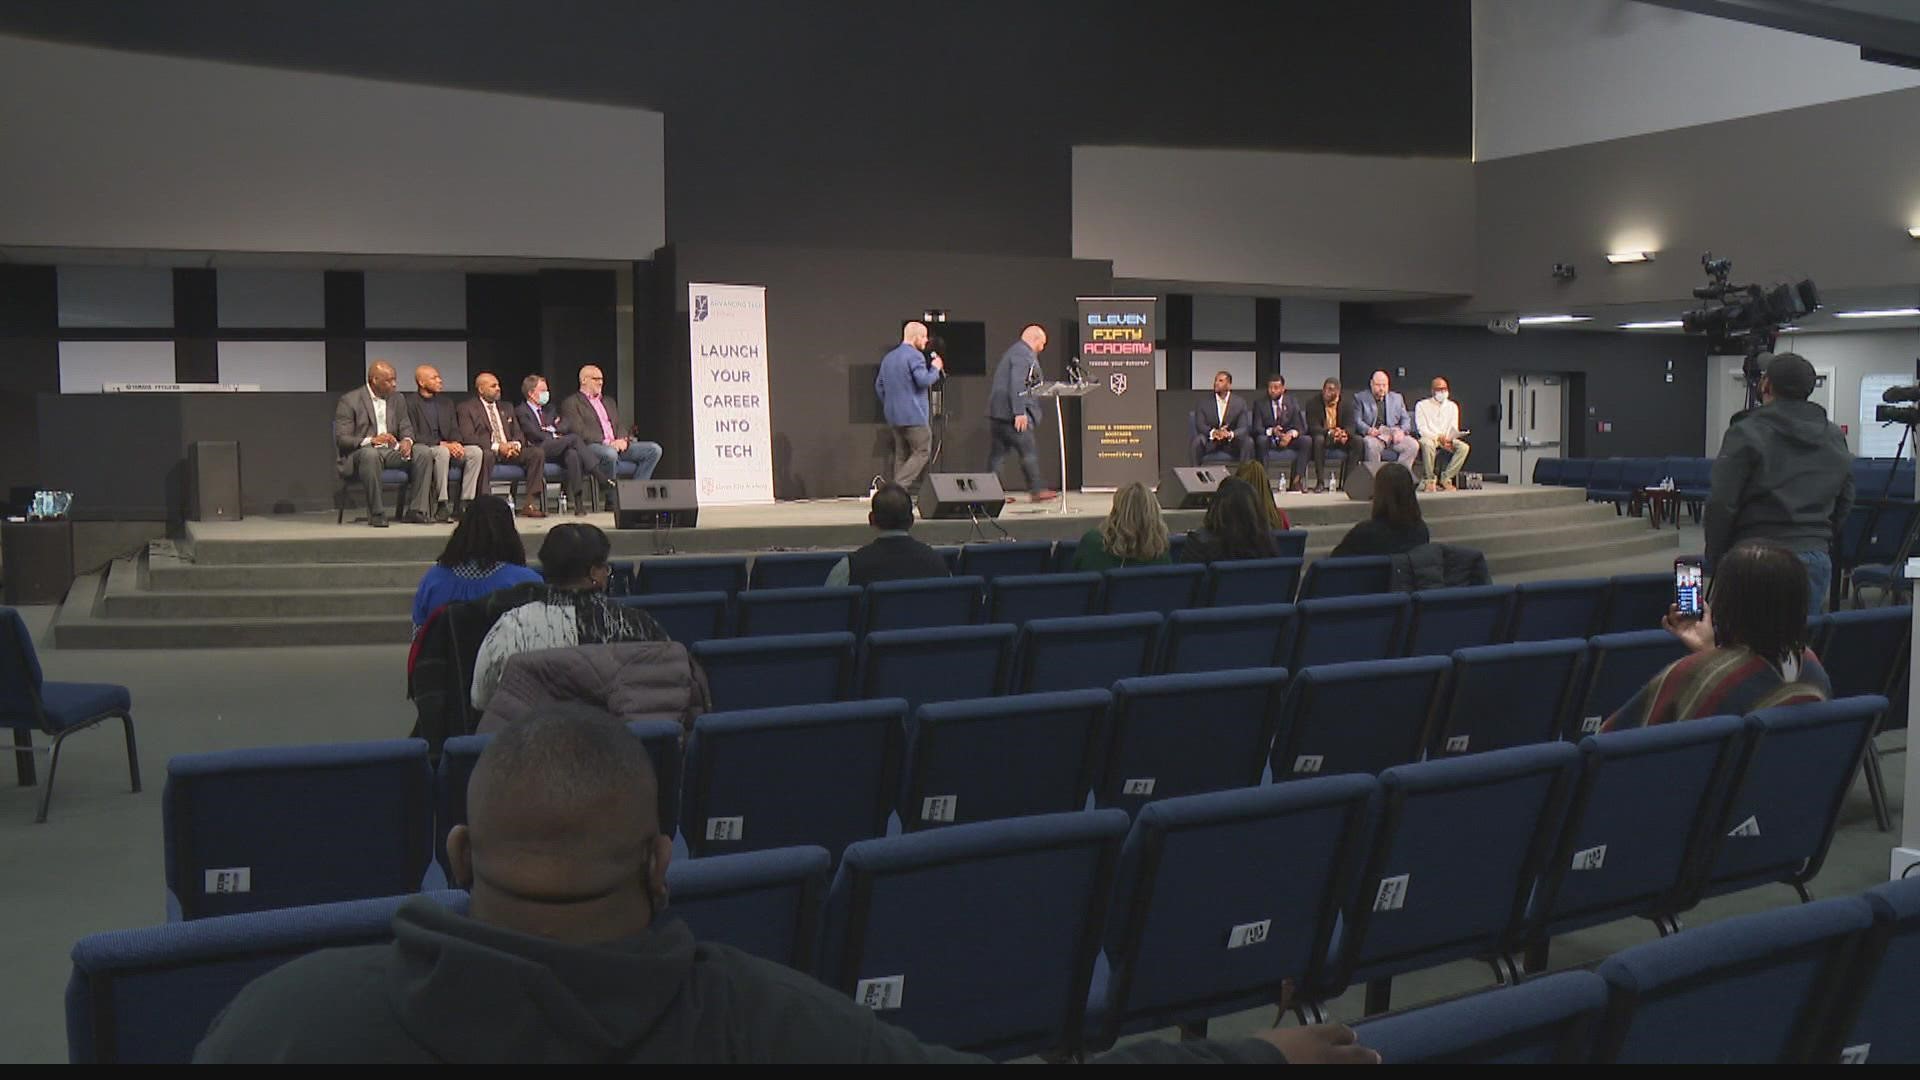 A new academy is hoping to make big changes to the tech world and neighborhoods on the east side Indianapolis.